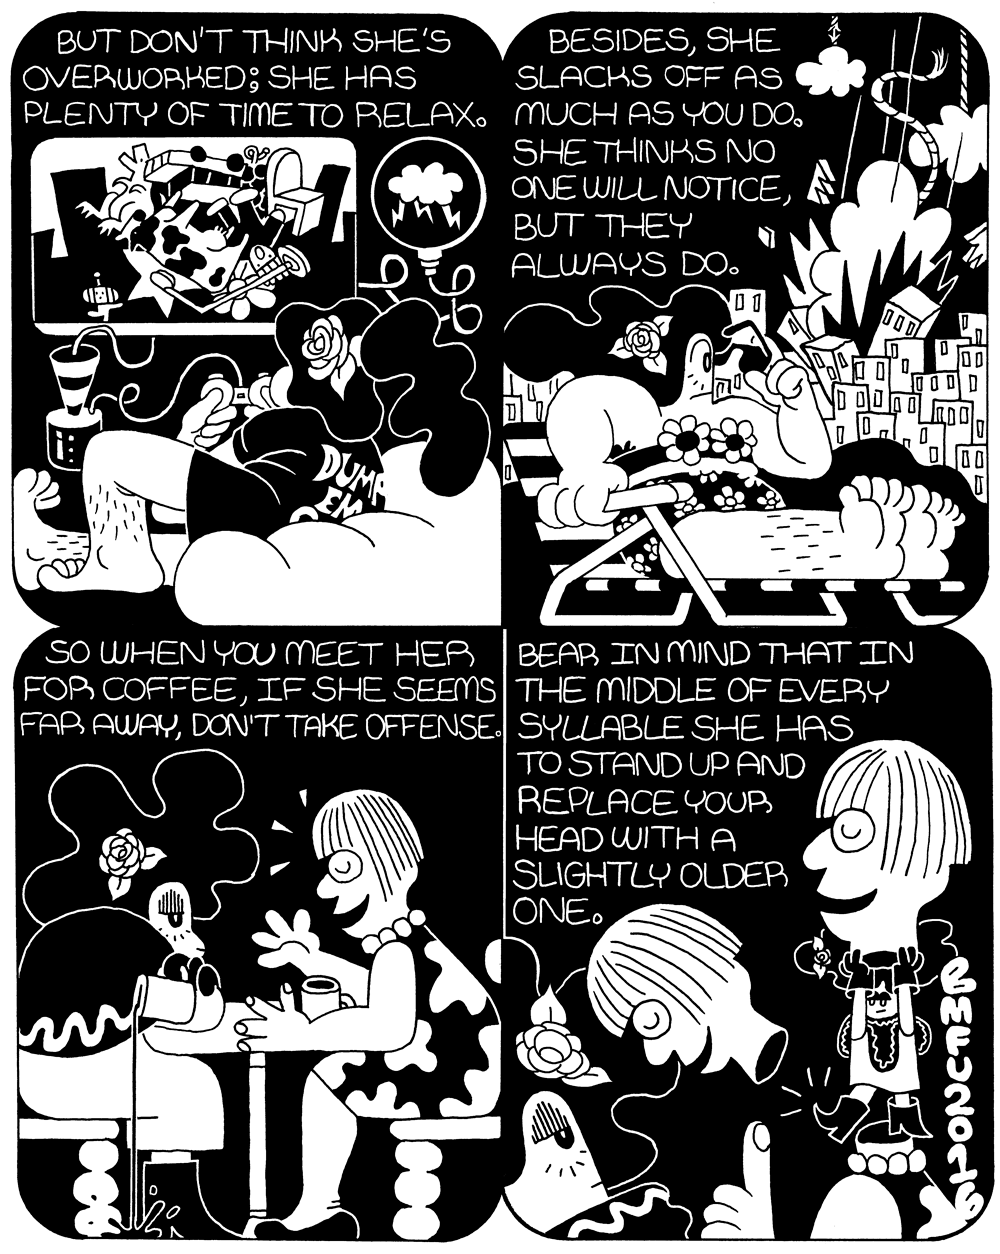 She's Done it All! Part 2 Page 4 by Benjamin Urkowitz for Hazlitt